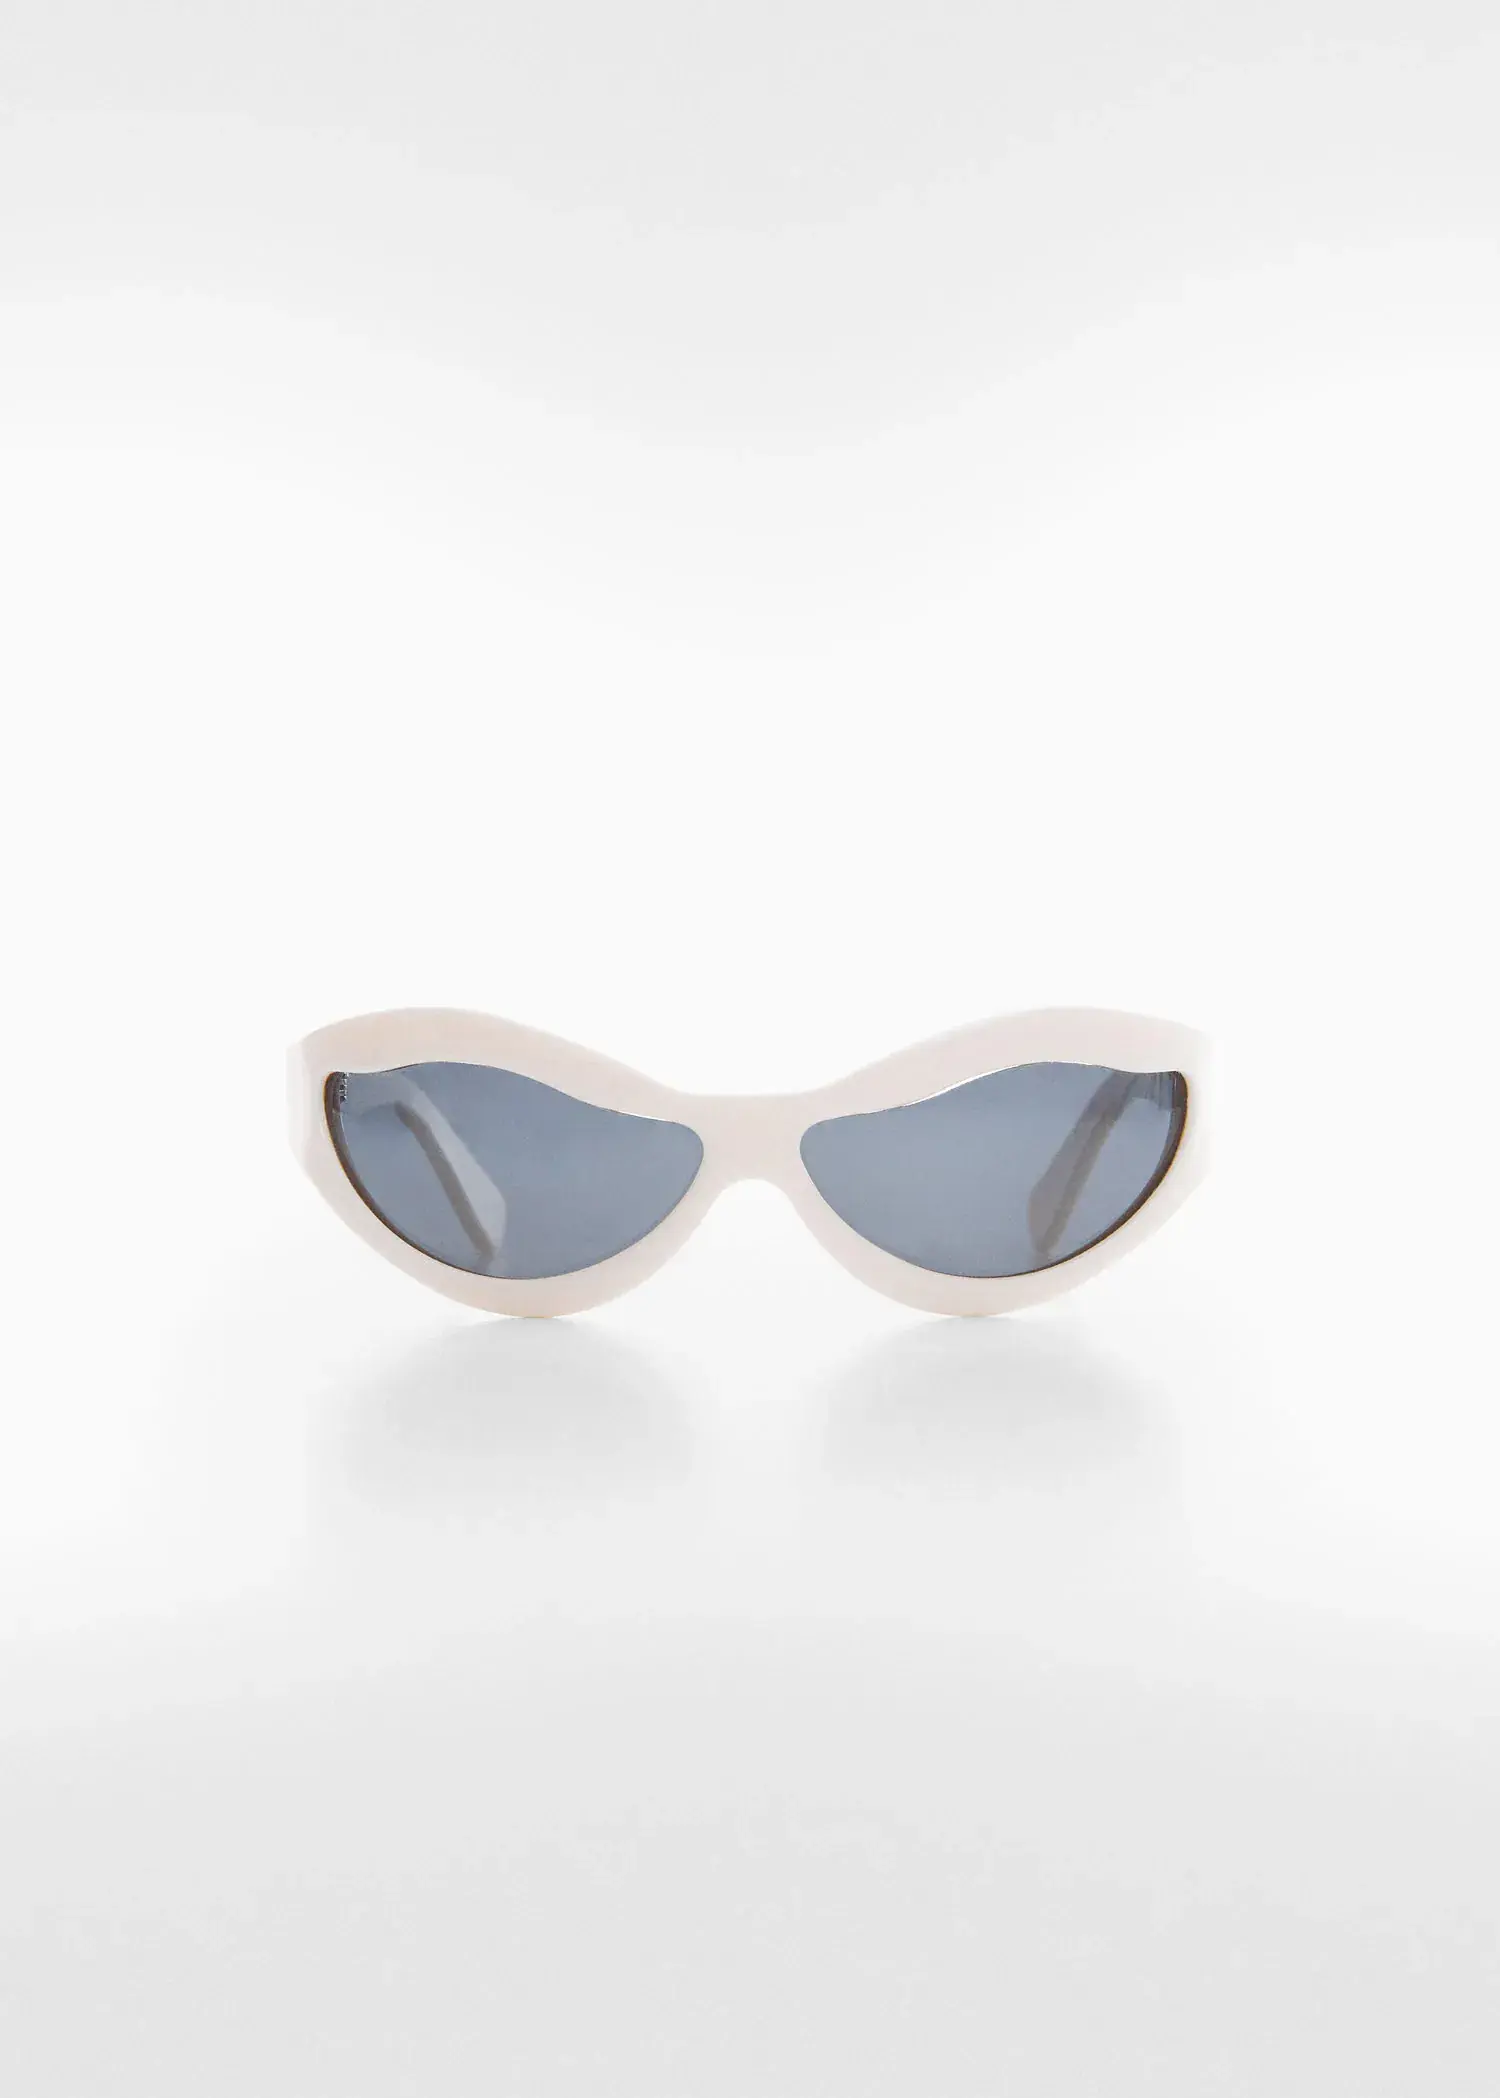 Mango Irregular crystals sunglasses. a pair of white sunglasses on top of a white table. 